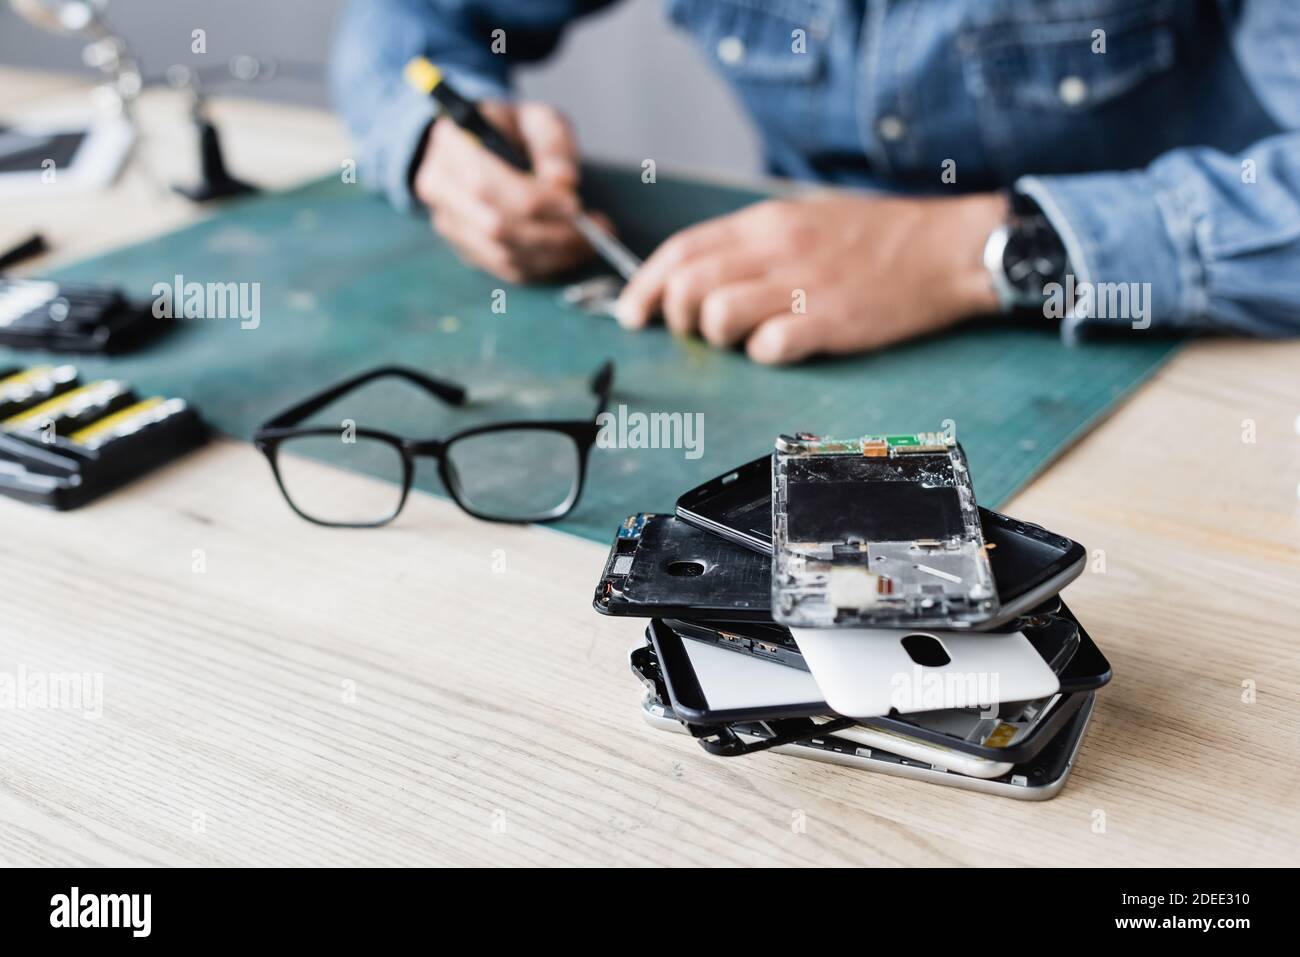 Close up view of pile with broken mobile phones near eyeglasses on workplace with blurred repairman working on background Stock Photo